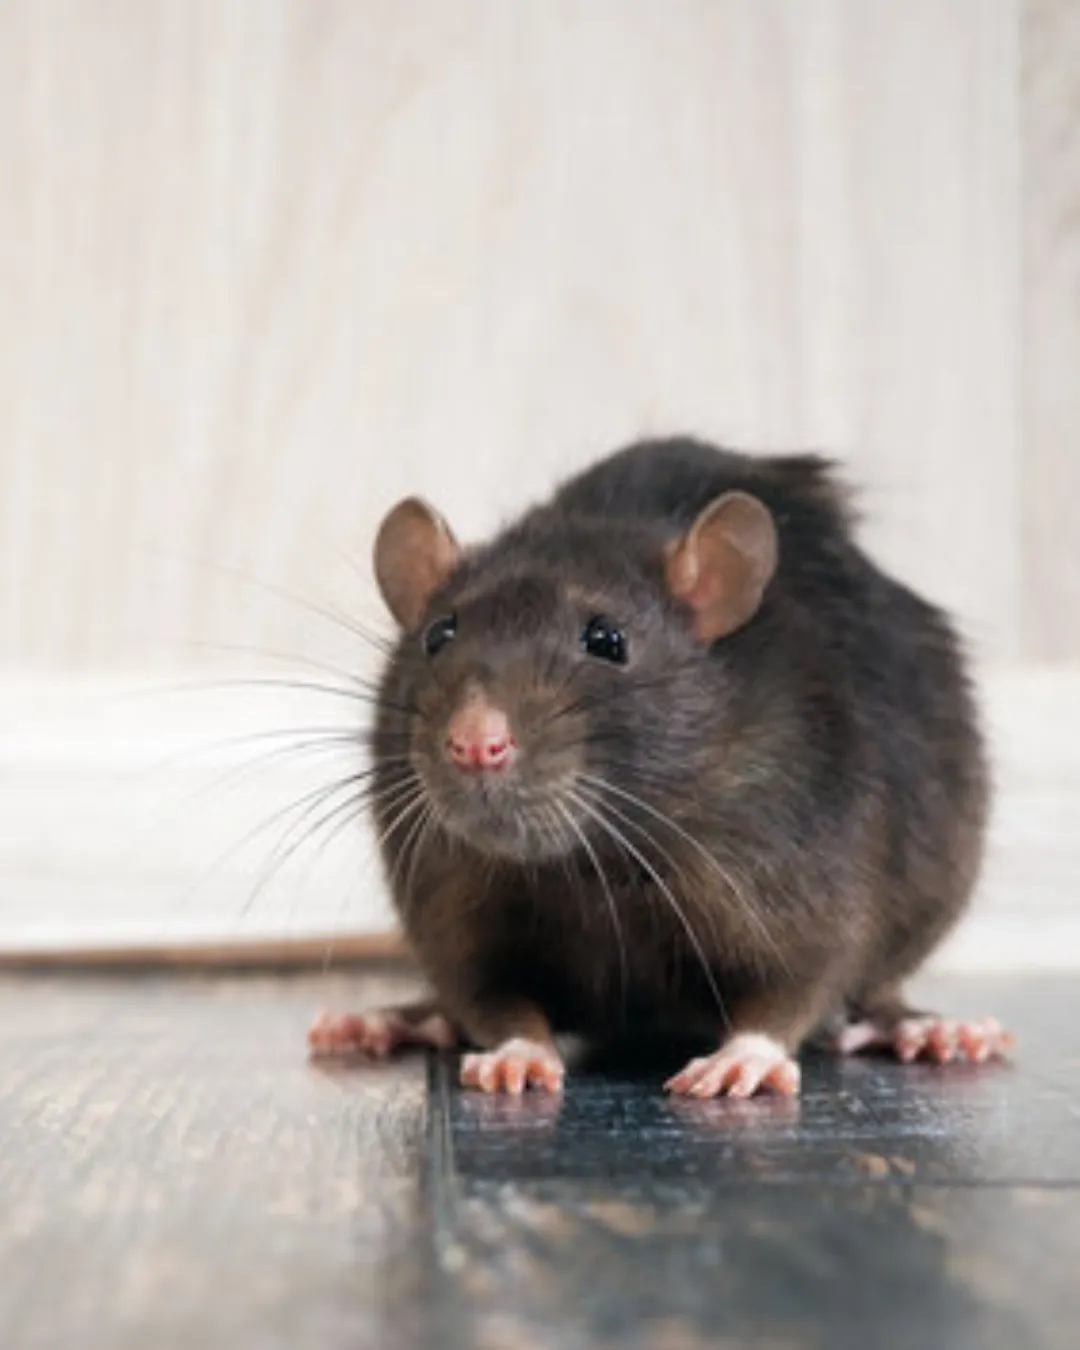 Rodent Management Solutions